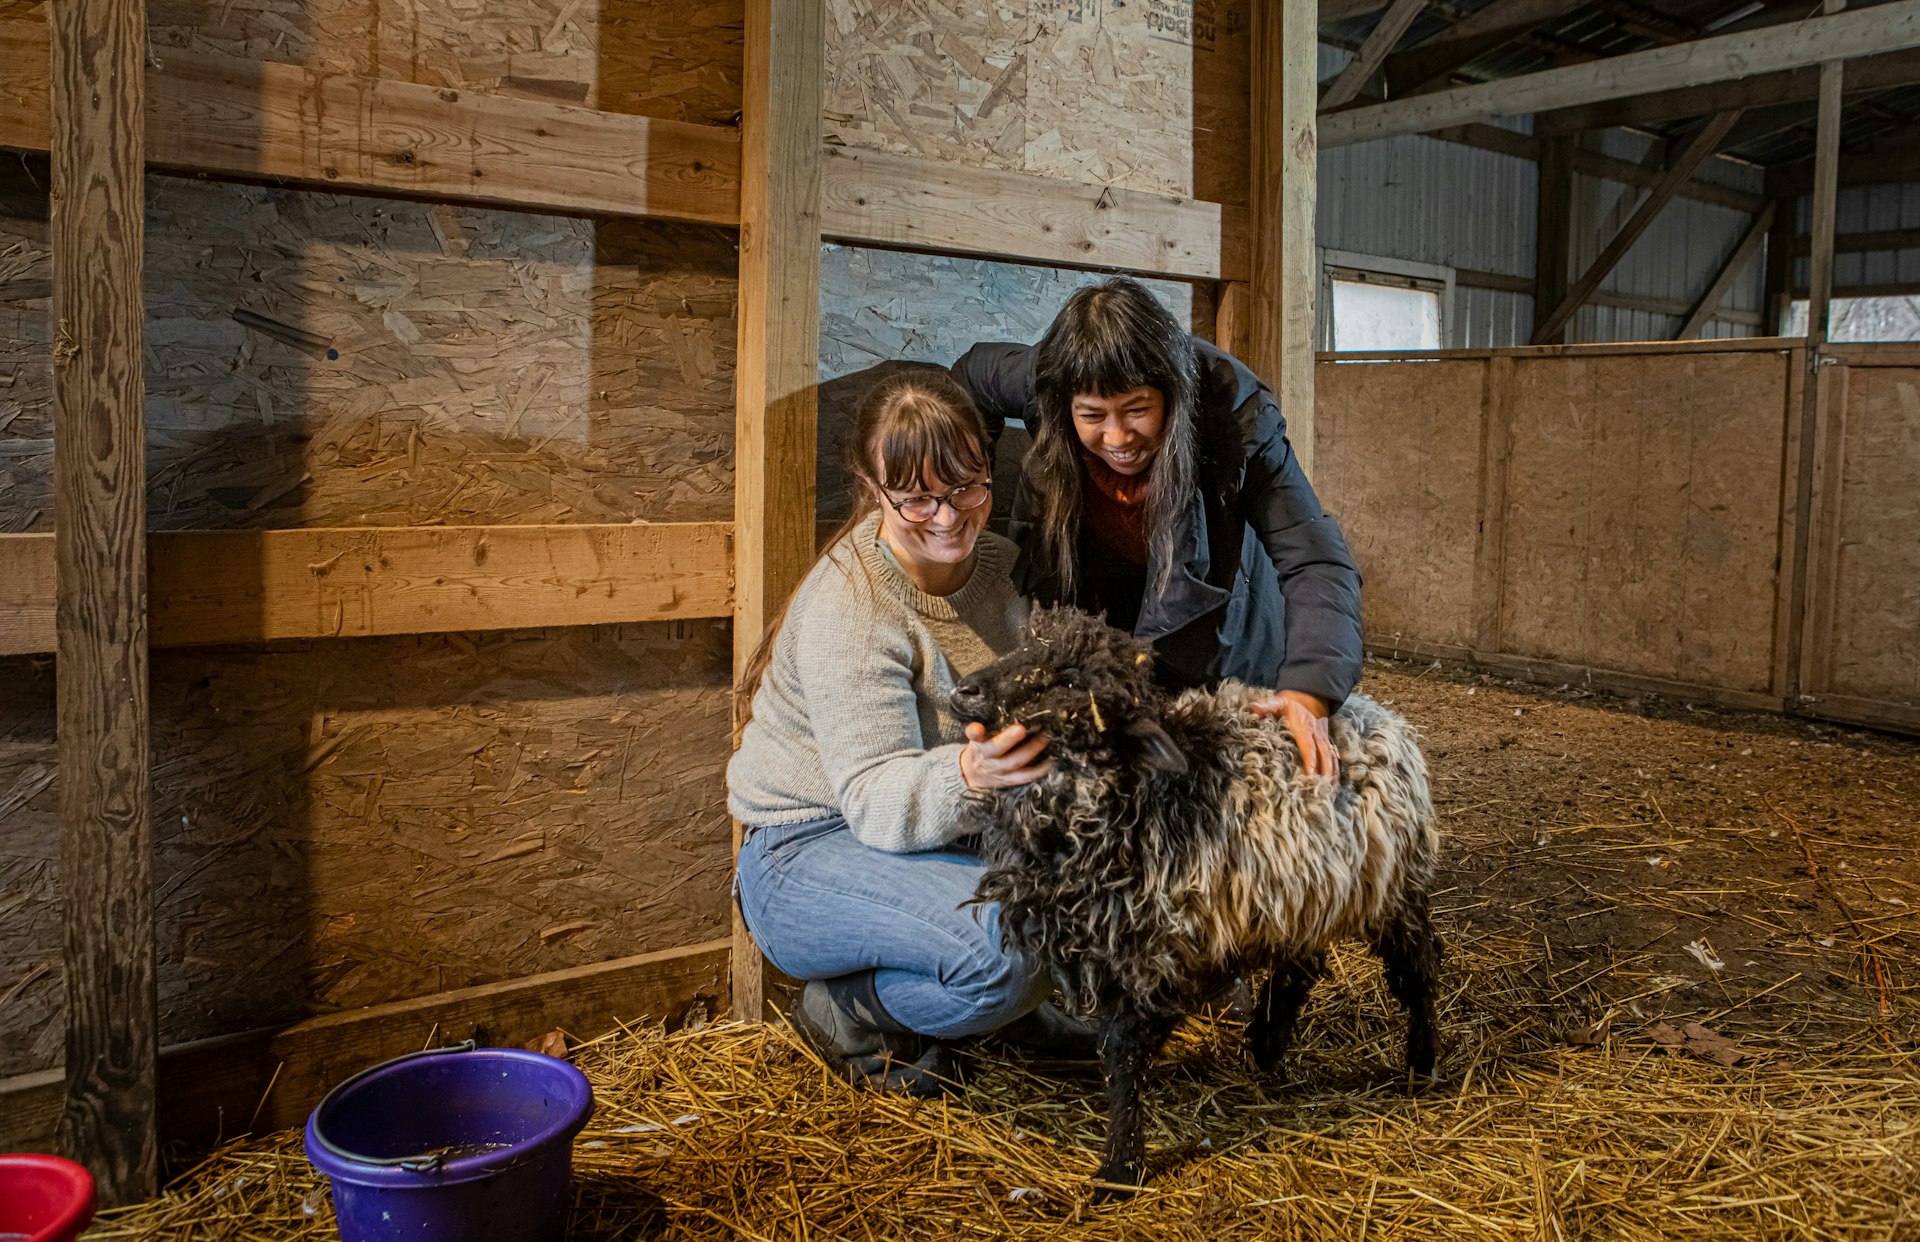 Rachel Naijar and Celeste Malvar Stewart pet a black and white sheep in the barn at Fairie Haven Farm, where the ground is strewn with hay